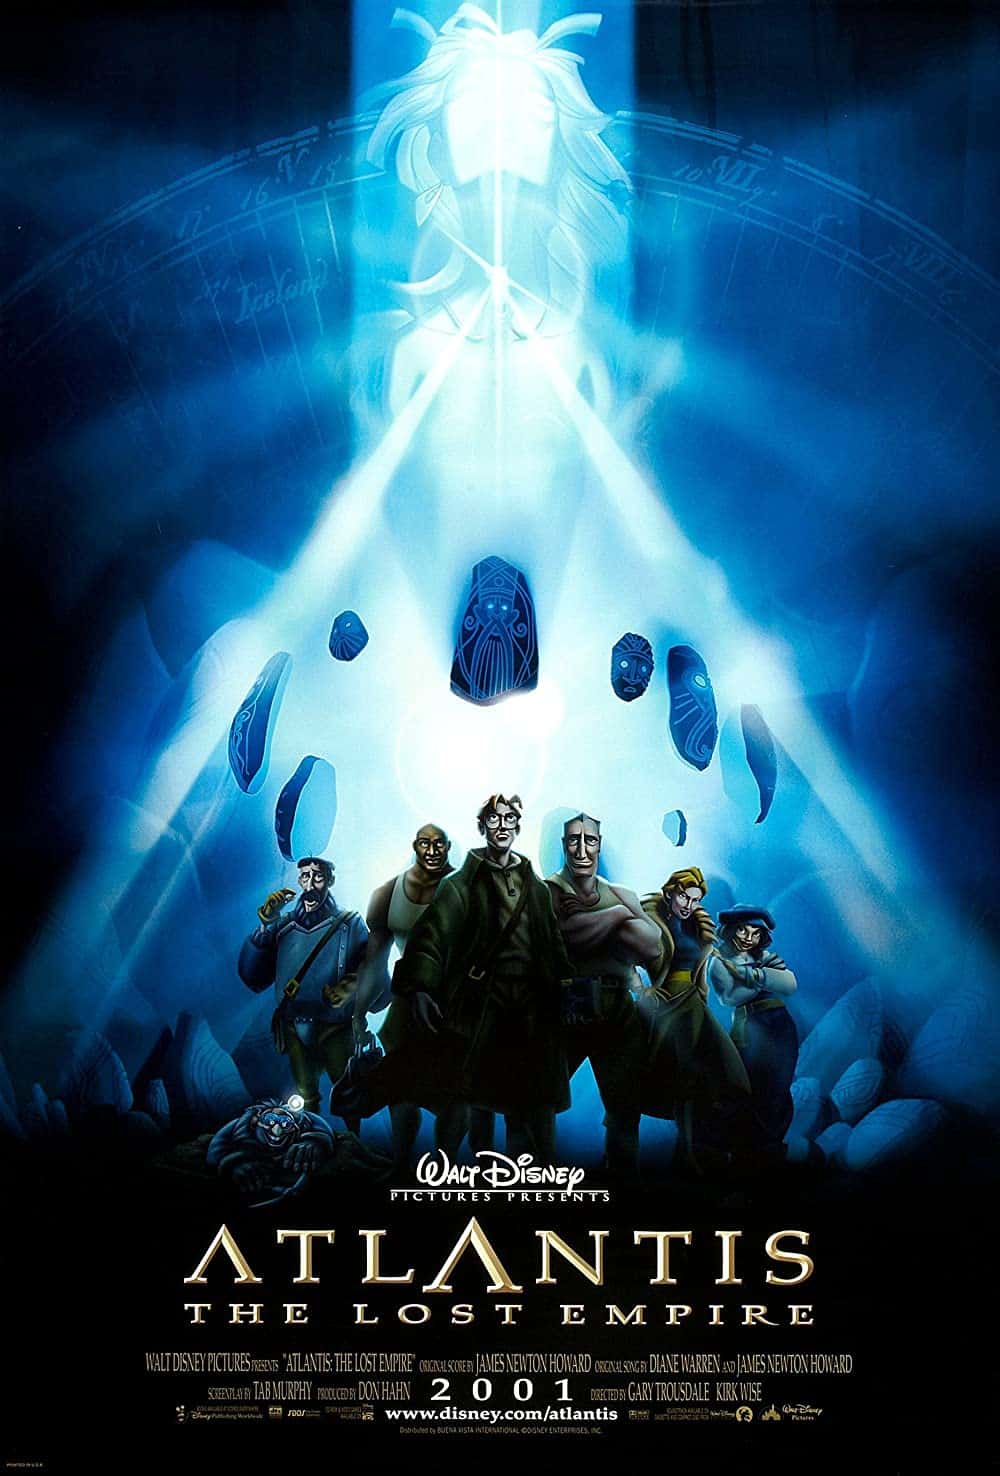 Atlantis The Lost Empire (2001) 15 Best Steampunk Movies to Check Out